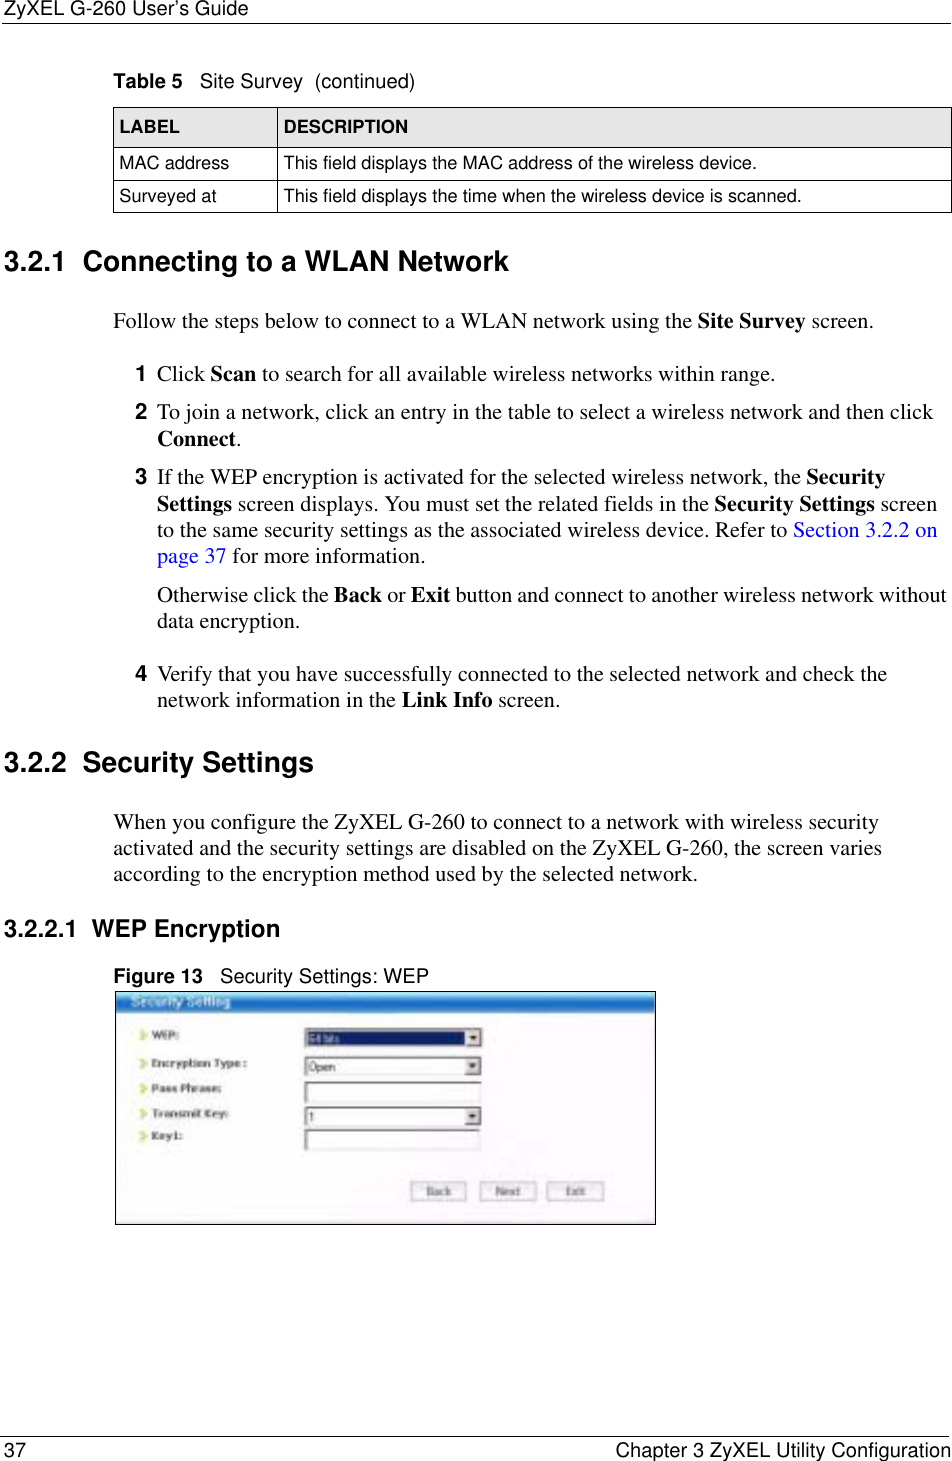 ZyXEL G-260 User’s Guide37 Chapter 3 ZyXEL Utility Configuration3.2.1  Connecting to a WLAN Network Follow the steps below to connect to a WLAN network using the Site Survey screen.1Click Scan to search for all available wireless networks within range.2To join a network, click an entry in the table to select a wireless network and then click Connect.3If the WEP encryption is activated for the selected wireless network, the Security Settings screen displays. You must set the related fields in the Security Settings screen to the same security settings as the associated wireless device. Refer to Section 3.2.2 on page 37 for more information.Otherwise click the Back or Exit button and connect to another wireless network without data encryption.4Verify that you have successfully connected to the selected network and check the network information in the Link Info screen.3.2.2  Security Settings When you configure the ZyXEL G-260 to connect to a network with wireless security activated and the security settings are disabled on the ZyXEL G-260, the screen varies according to the encryption method used by the selected network.3.2.2.1  WEP EncryptionFigure 13   Security Settings: WEP  MAC address  This field displays the MAC address of the wireless device.Surveyed at  This field displays the time when the wireless device is scanned.Table 5   Site Survey  (continued)LABEL DESCRIPTION